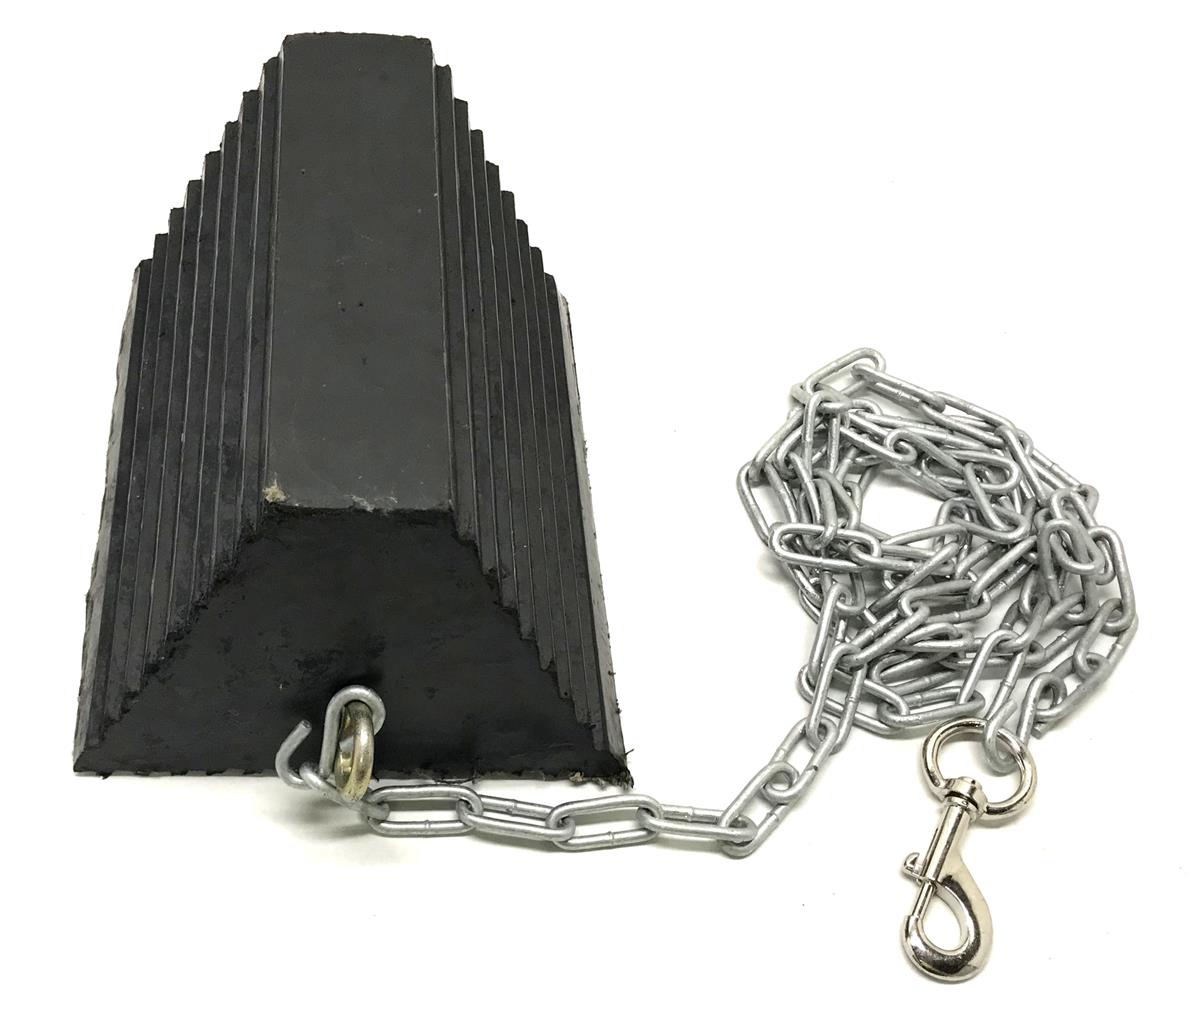 ALL-5283 | ALL-5283 Rubber Wheel Chock with Chain (3).jpg